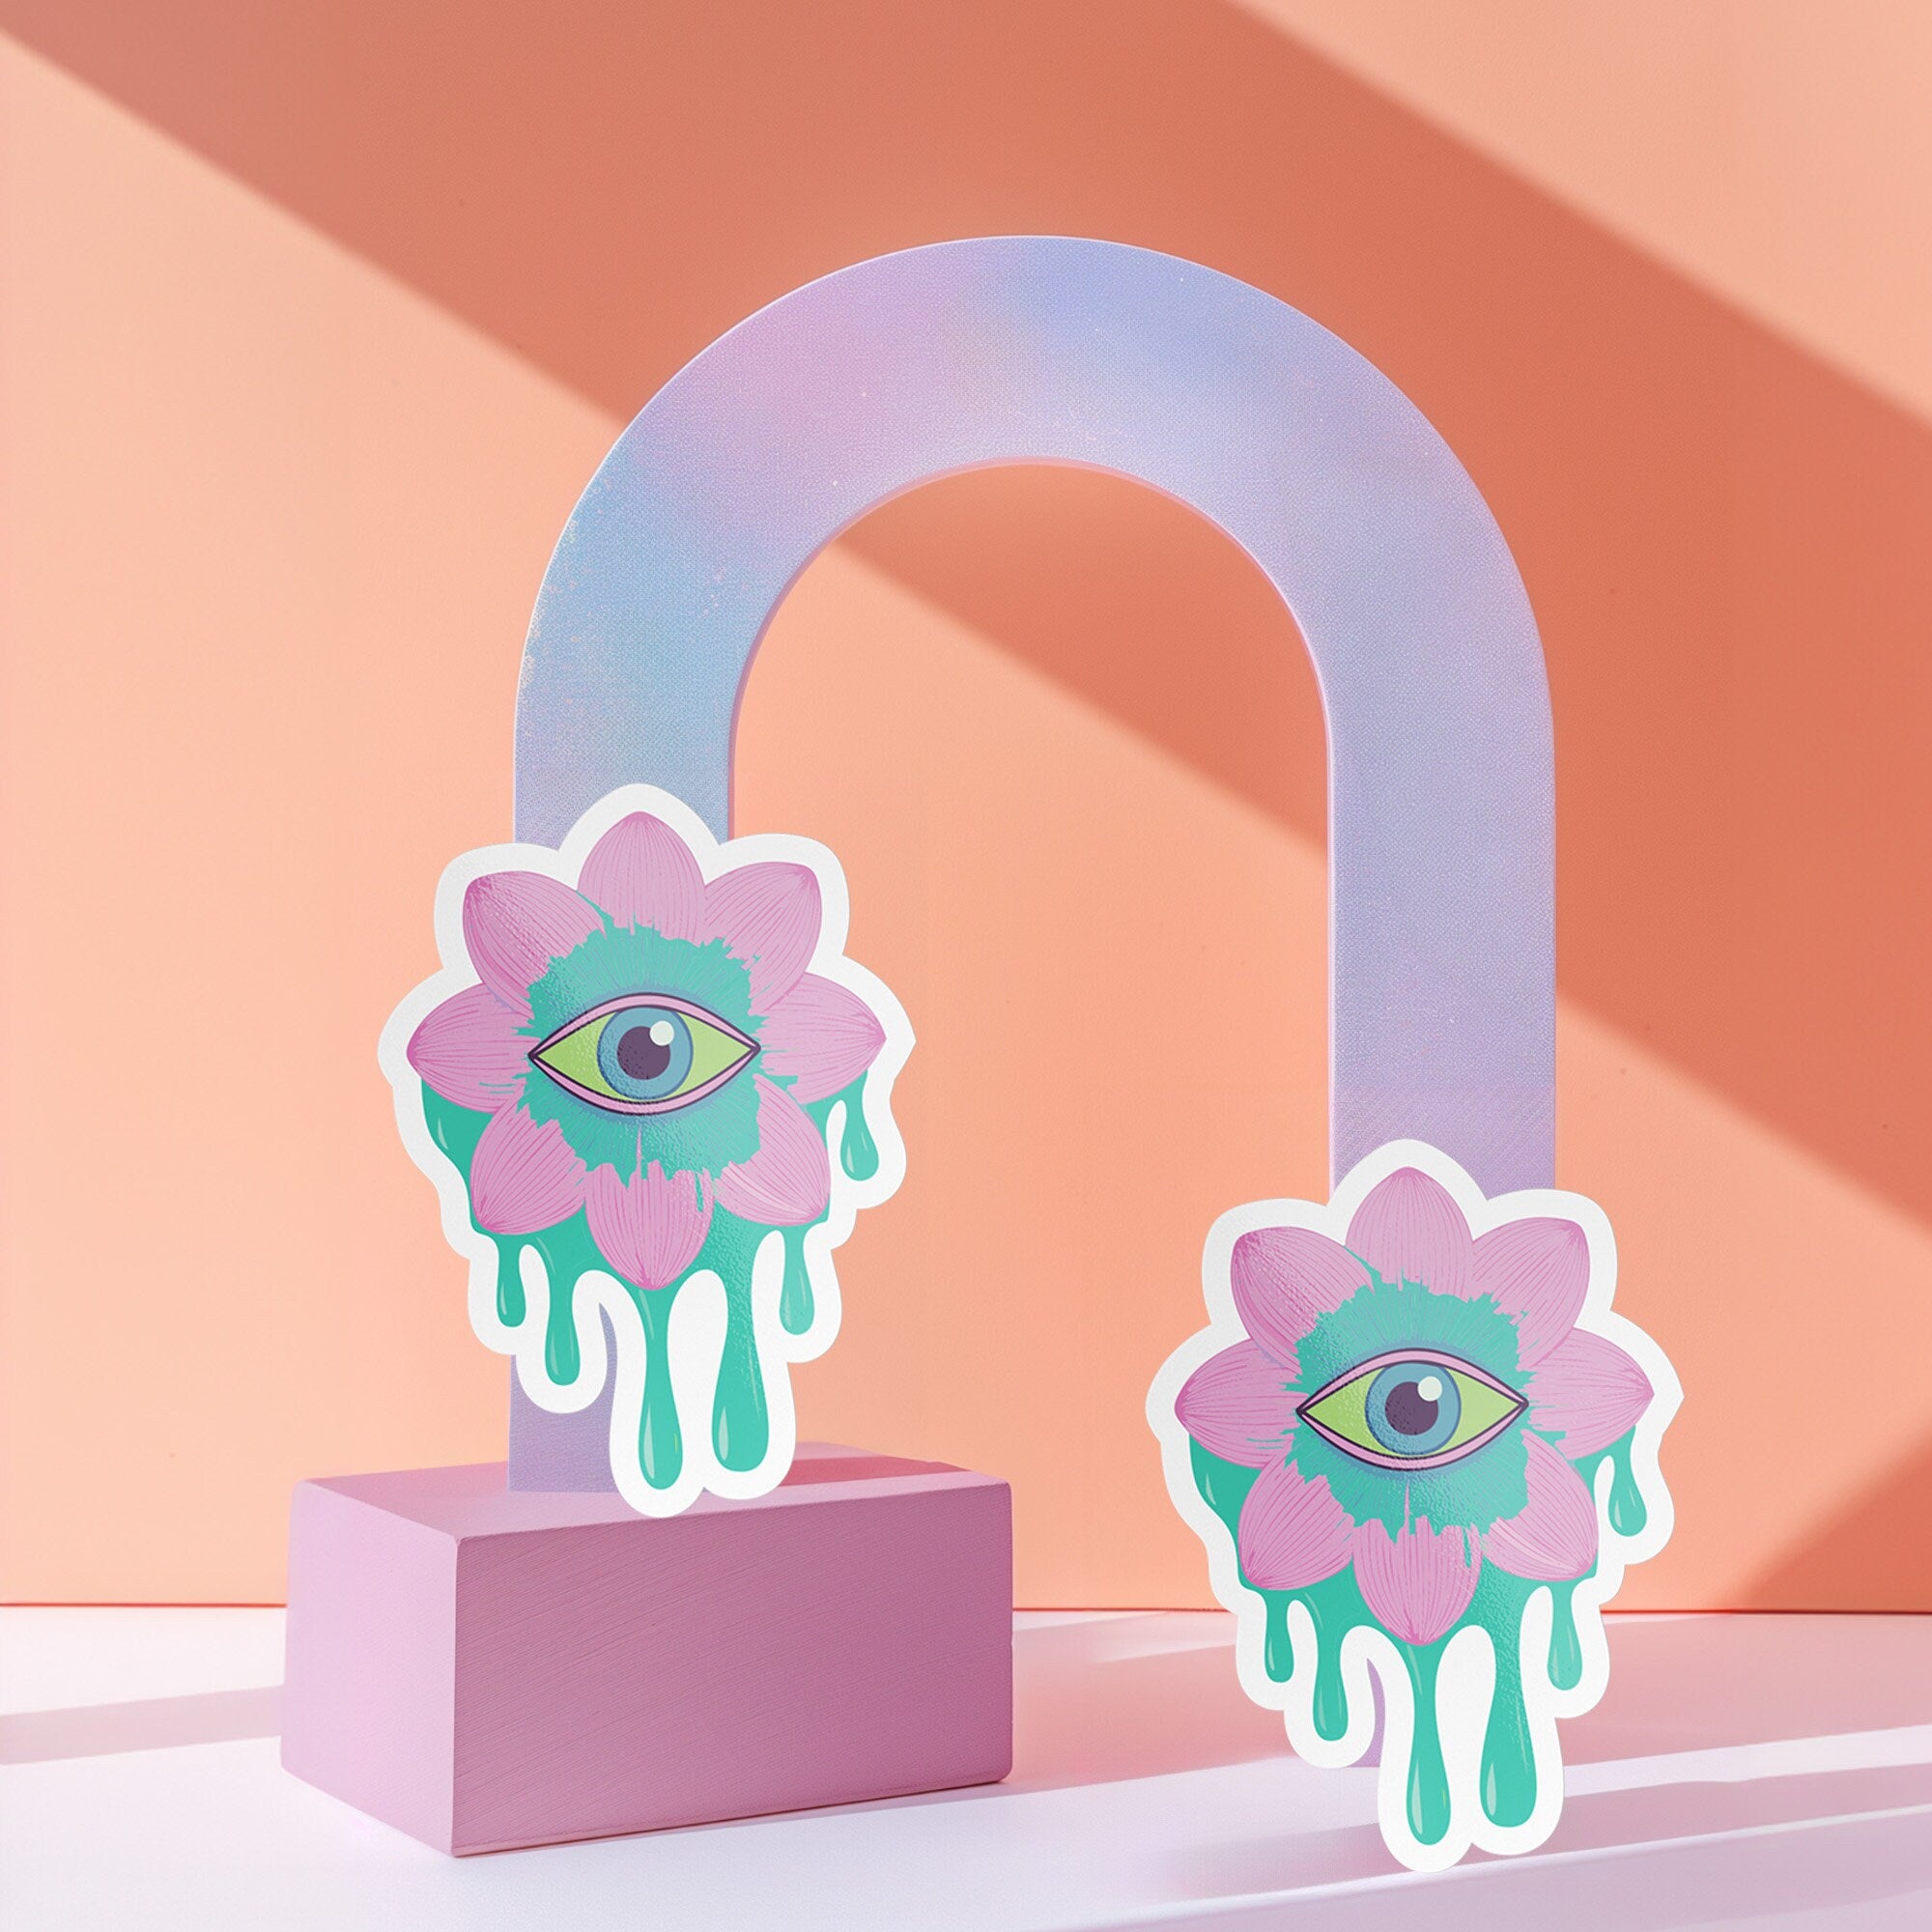 Trippy eyeball flower sticker in pastel pink and green, ideal for quirky and weirdcore enthusiasts. Available in Prism, Gem, and Glitter finishes. Handmade in Austin, Texas.